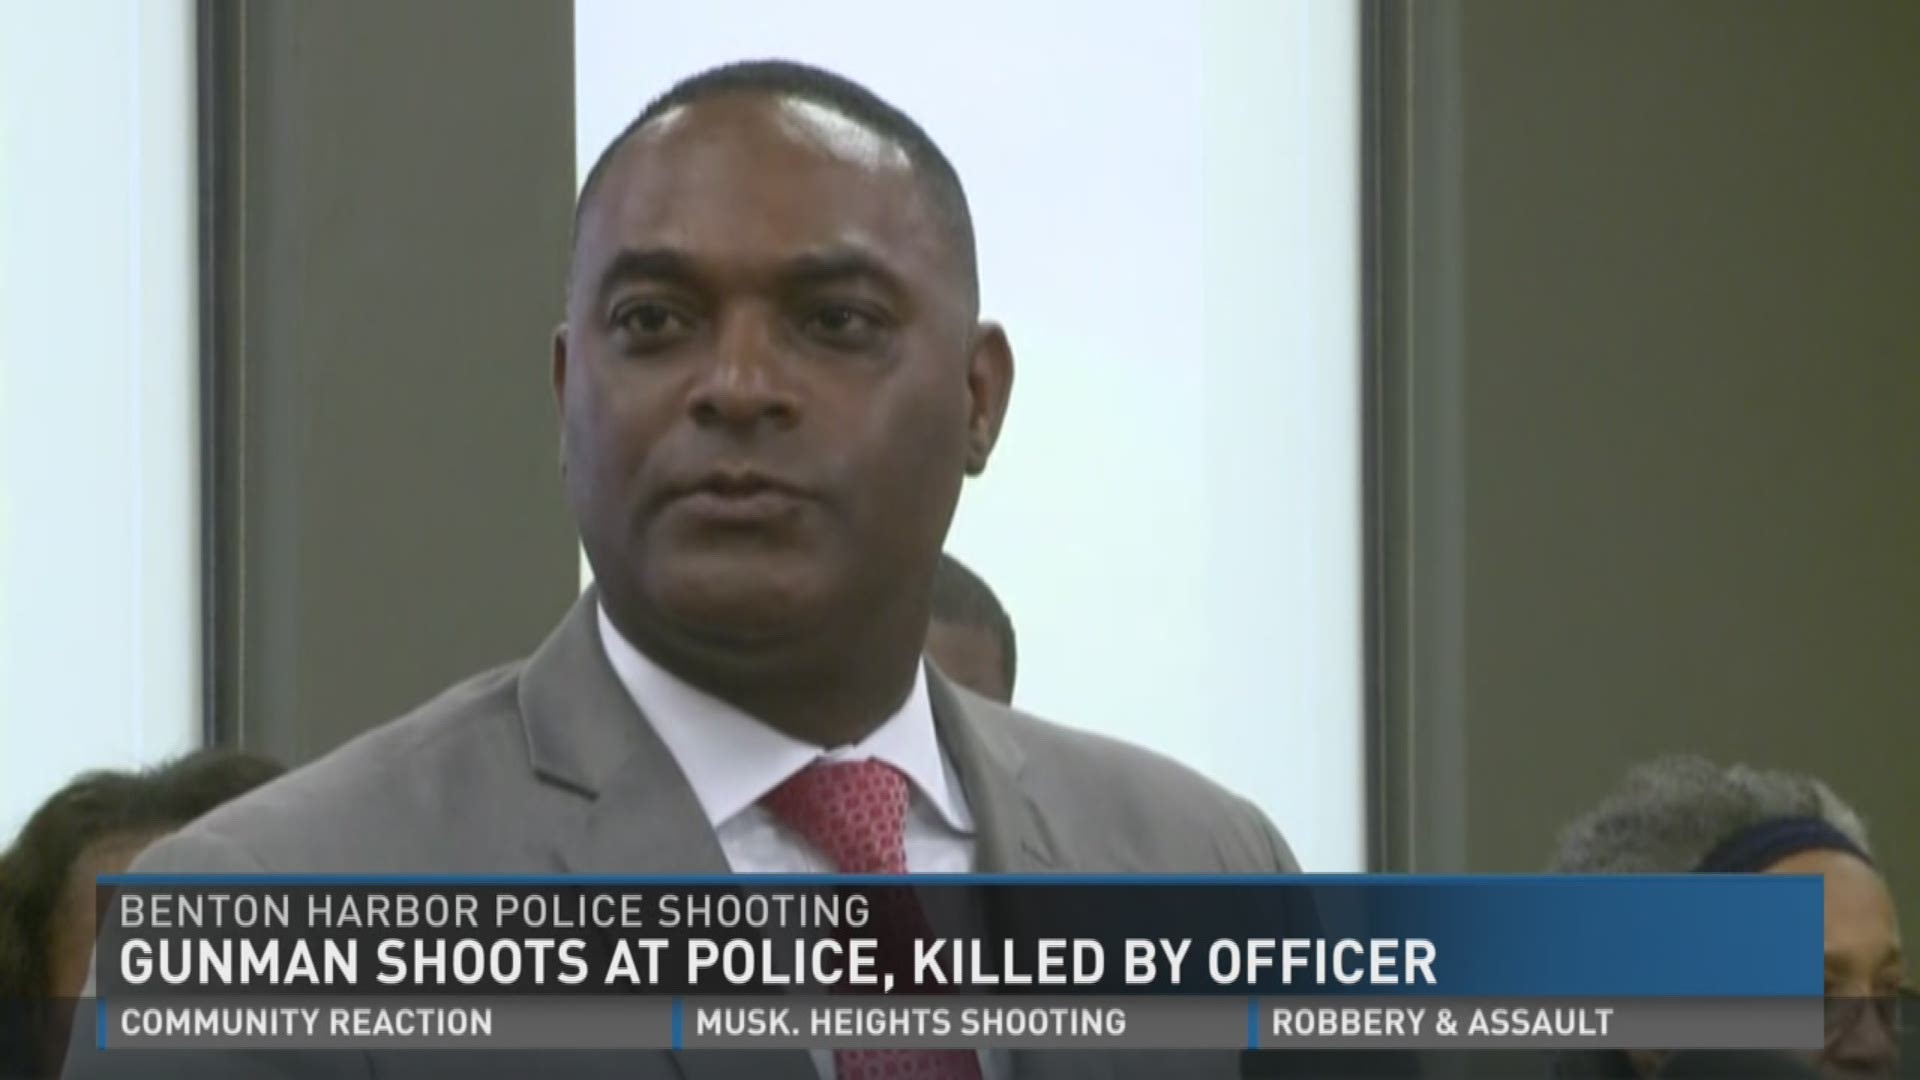 Benton Harbor mayor Marcus Muhammad says the family of the man shot and killed by a police officer early Tuesday wants everyone to remain peaceful.